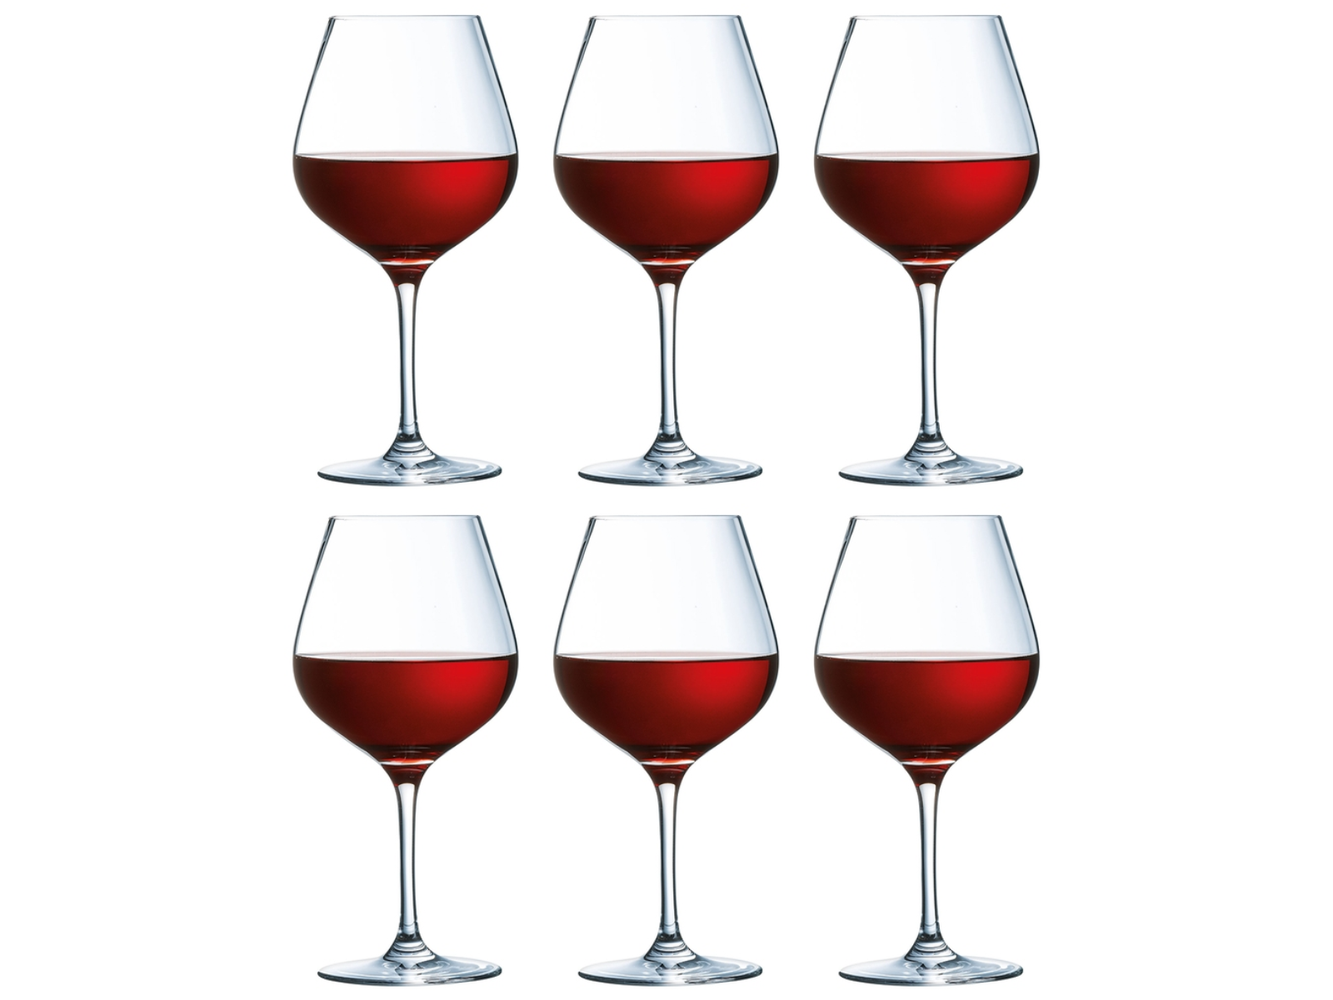 Glass wine glass - CHEF & SOMMELIER™ - Cabernet Vinos Jov Personalised, Lowest Prices Guaranteed